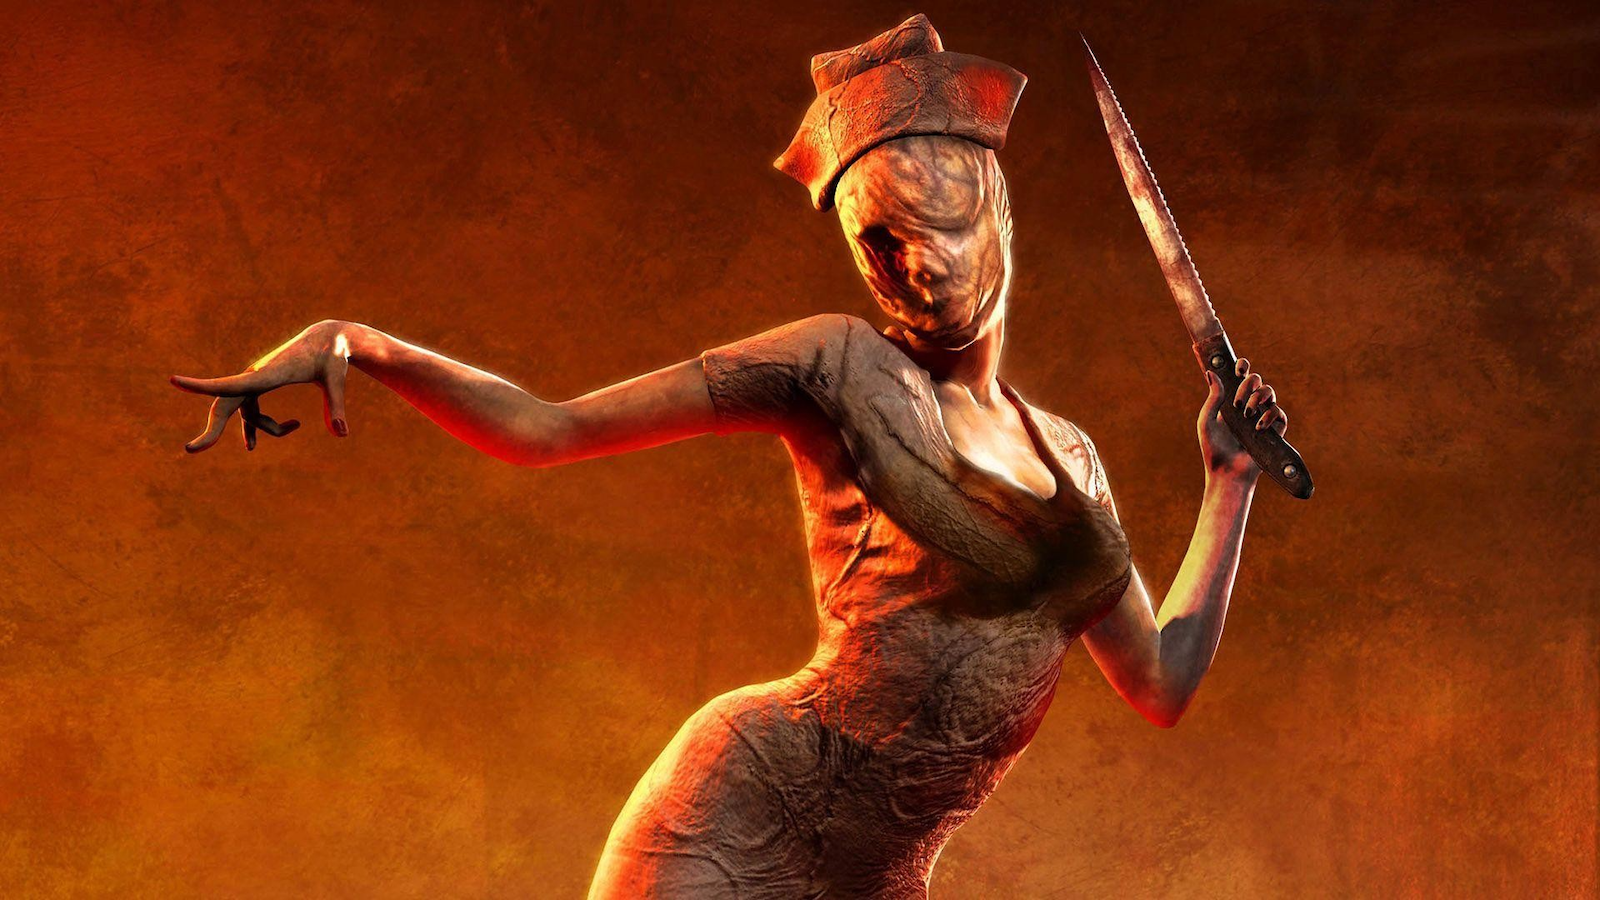 The 10 Best Silent Hill games of all-time